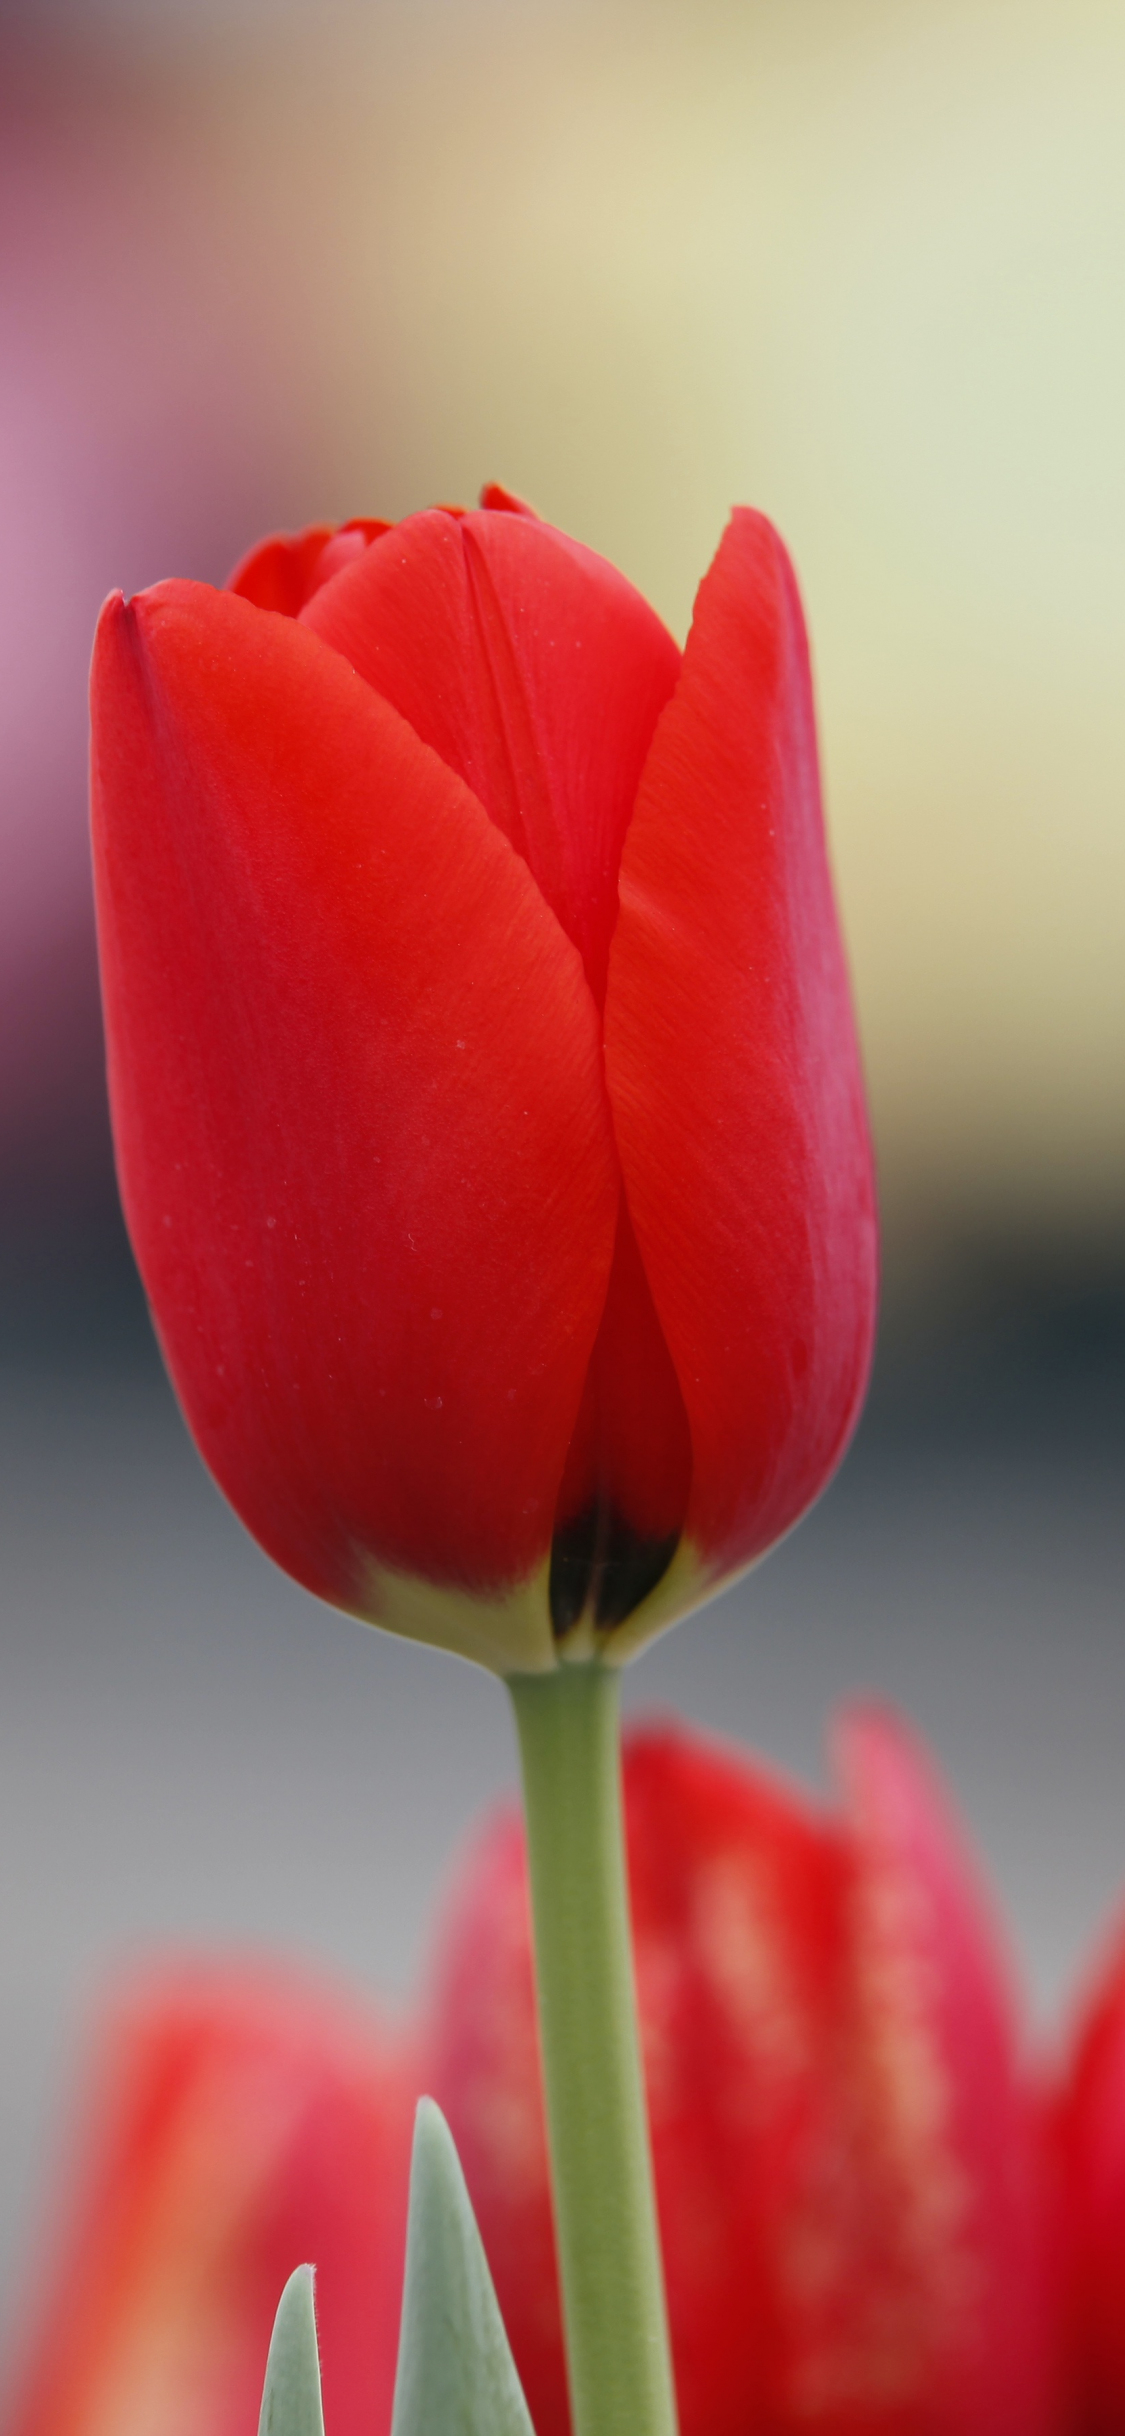 1125x2436 Download red tulip, flowers, bud wallpaper, iphone x, hd image, background, 939